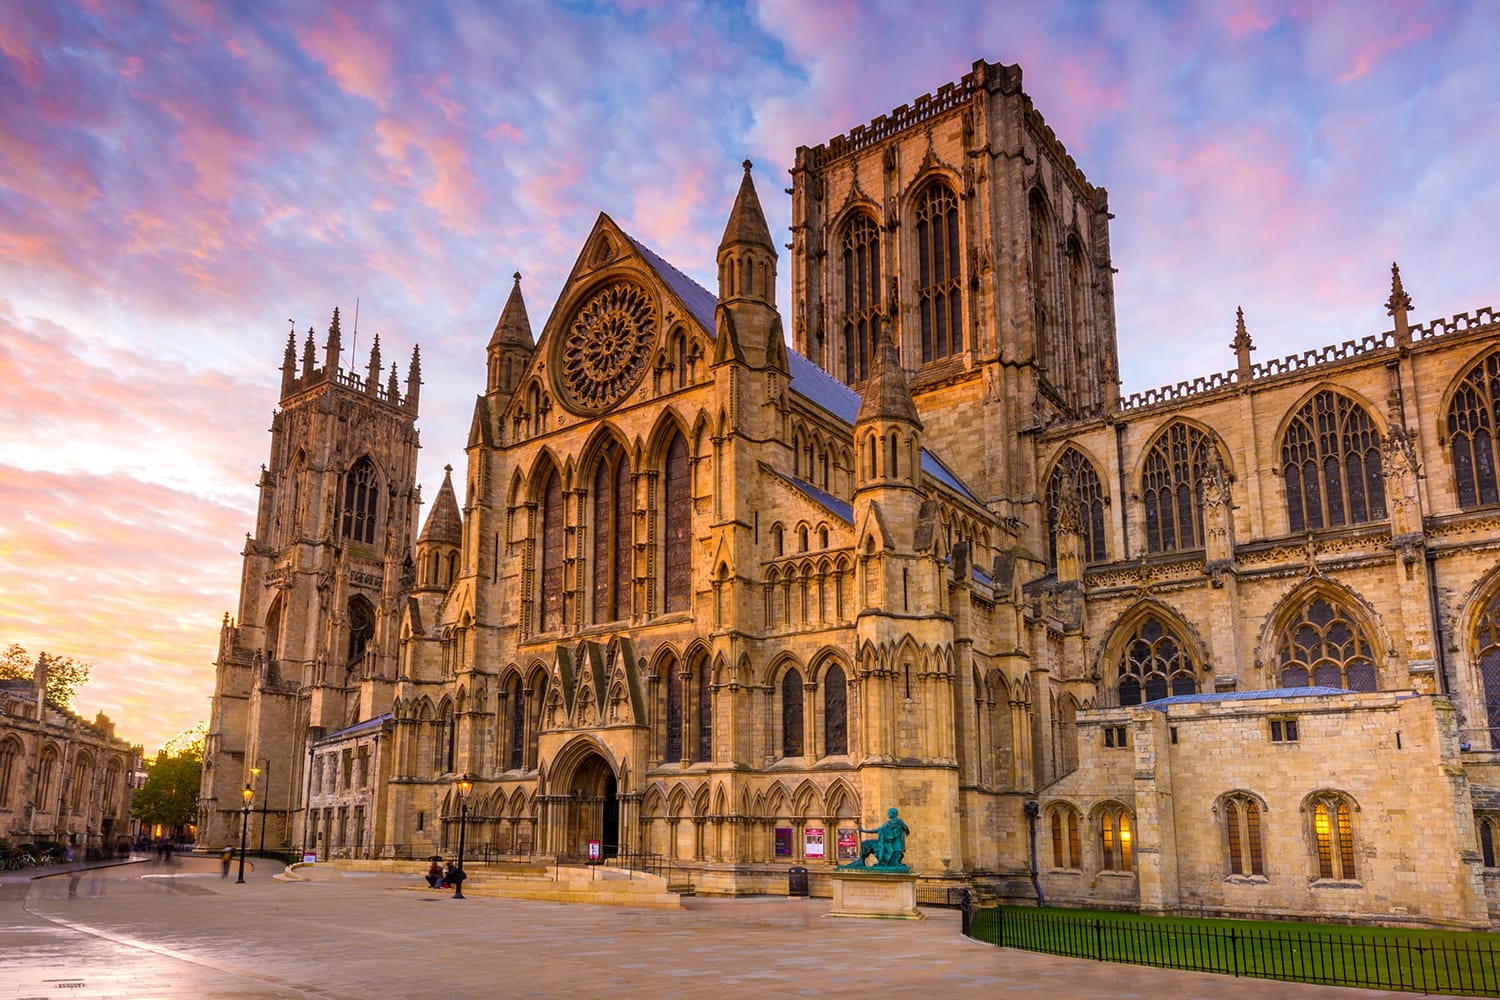 York Minster cathedral at sunset